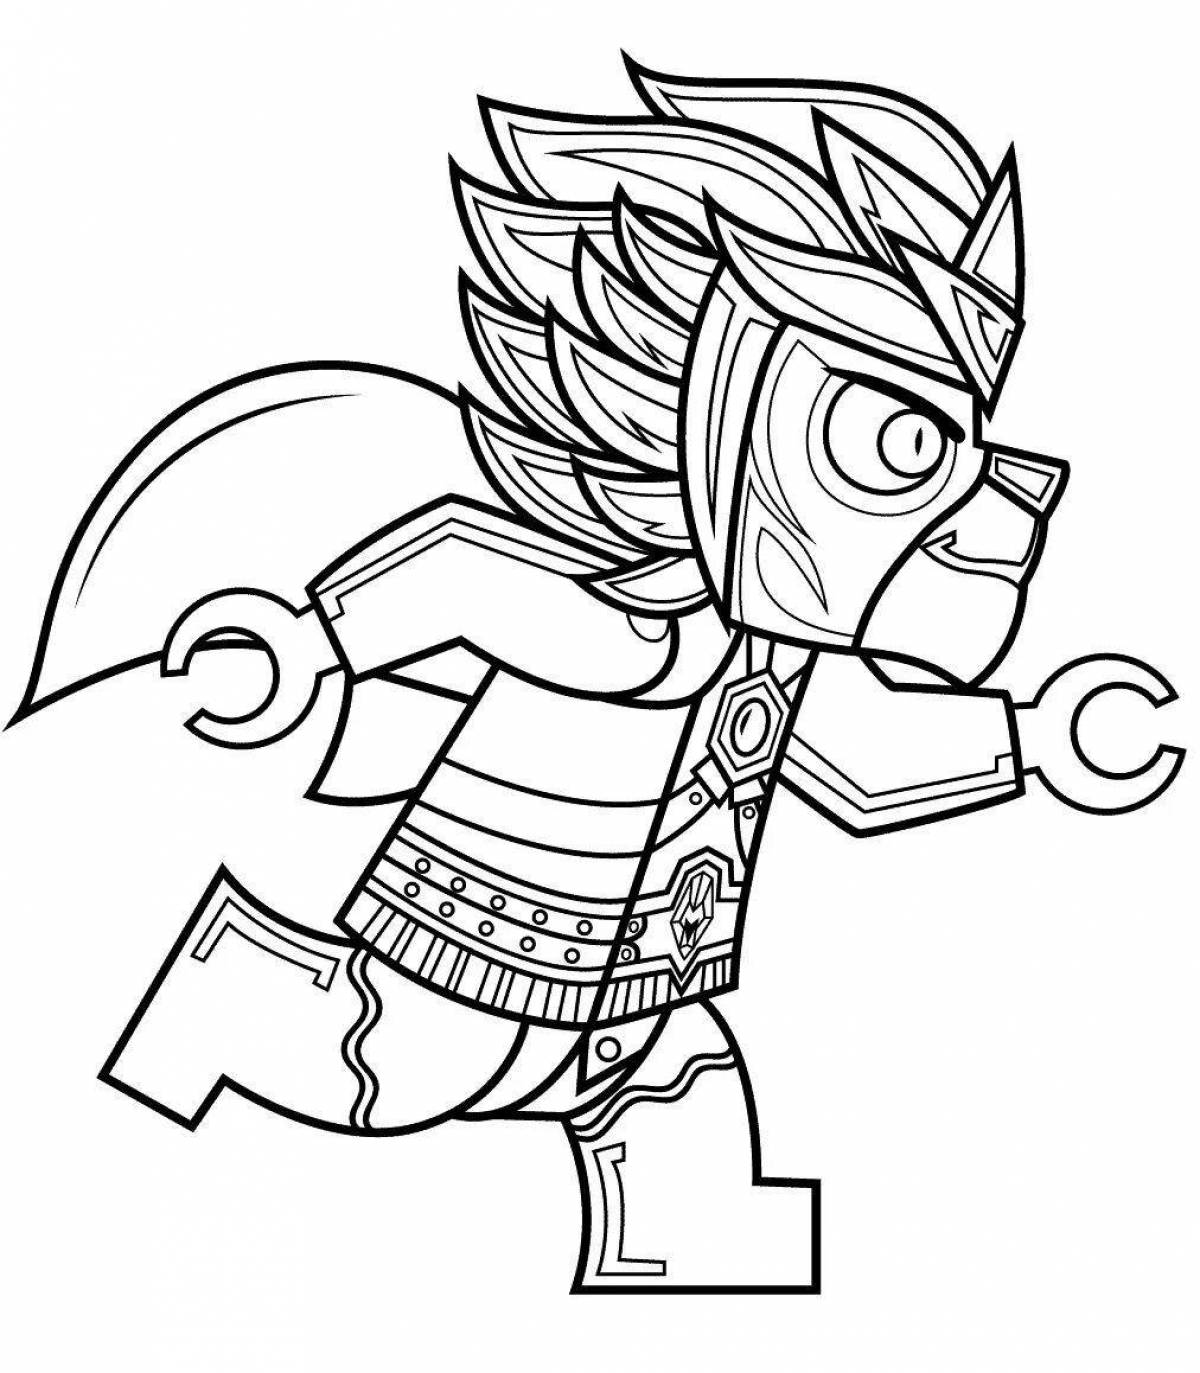 Great lego chima coloring book